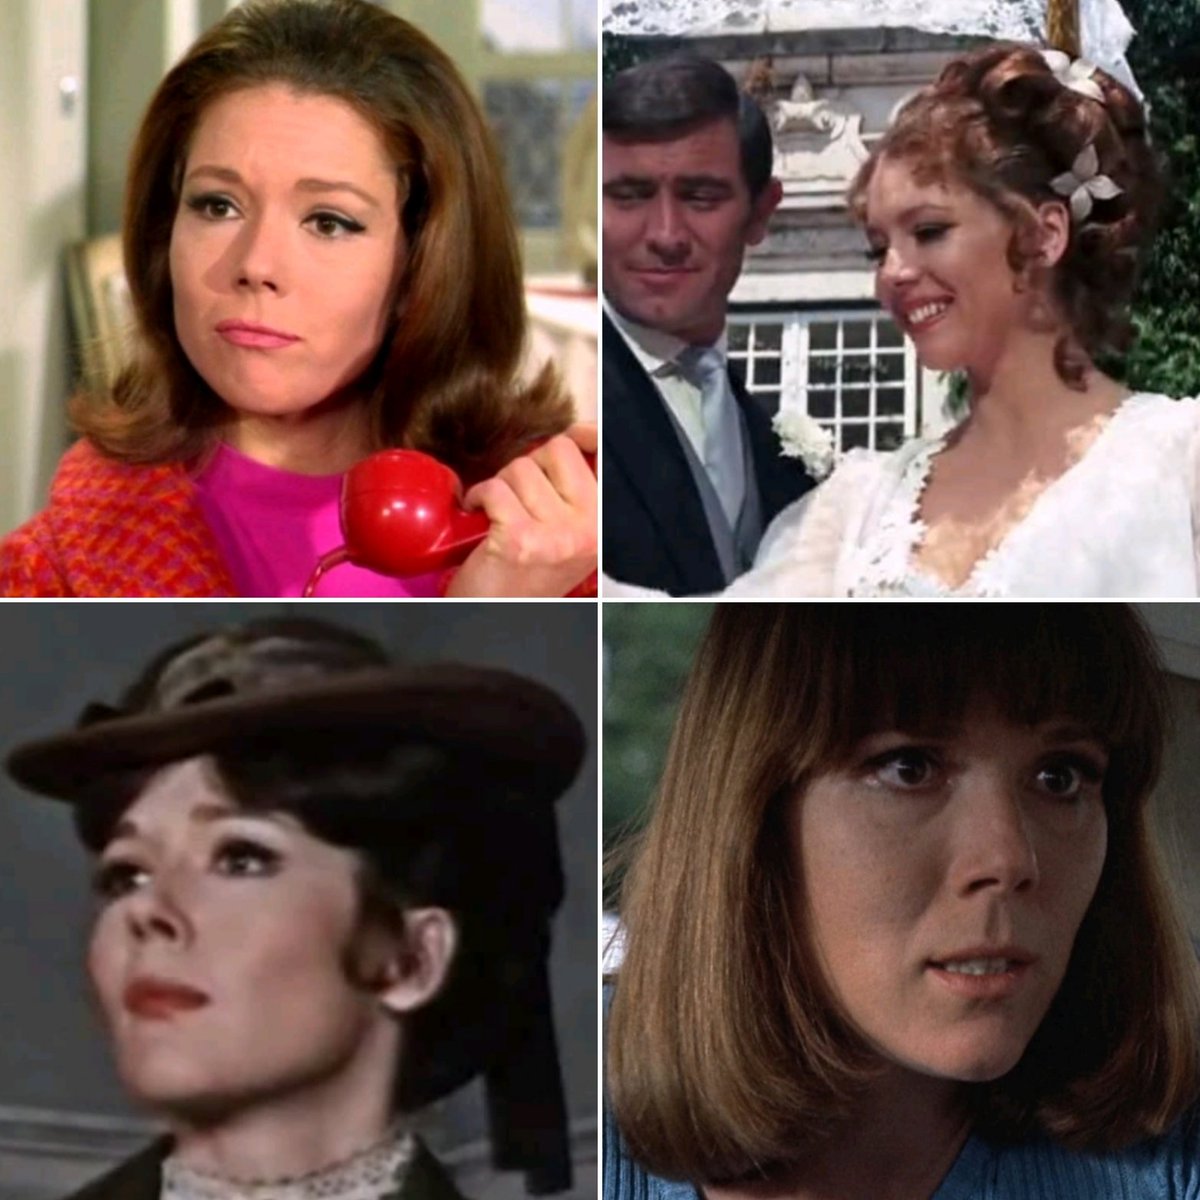 'The Avengers': 'The Forget-Me-Knot' (1968)

Emma Peel: 'Always keep your bowler on in time of stress, and watch out for diabolical masterminds...'

Diana Rigg - 1938 to 2020

(Pictured: #TheAvengers #OnHerMajestysSecretService #TheAssassinationBureau #TheatreofBlood.) #DianaRigg